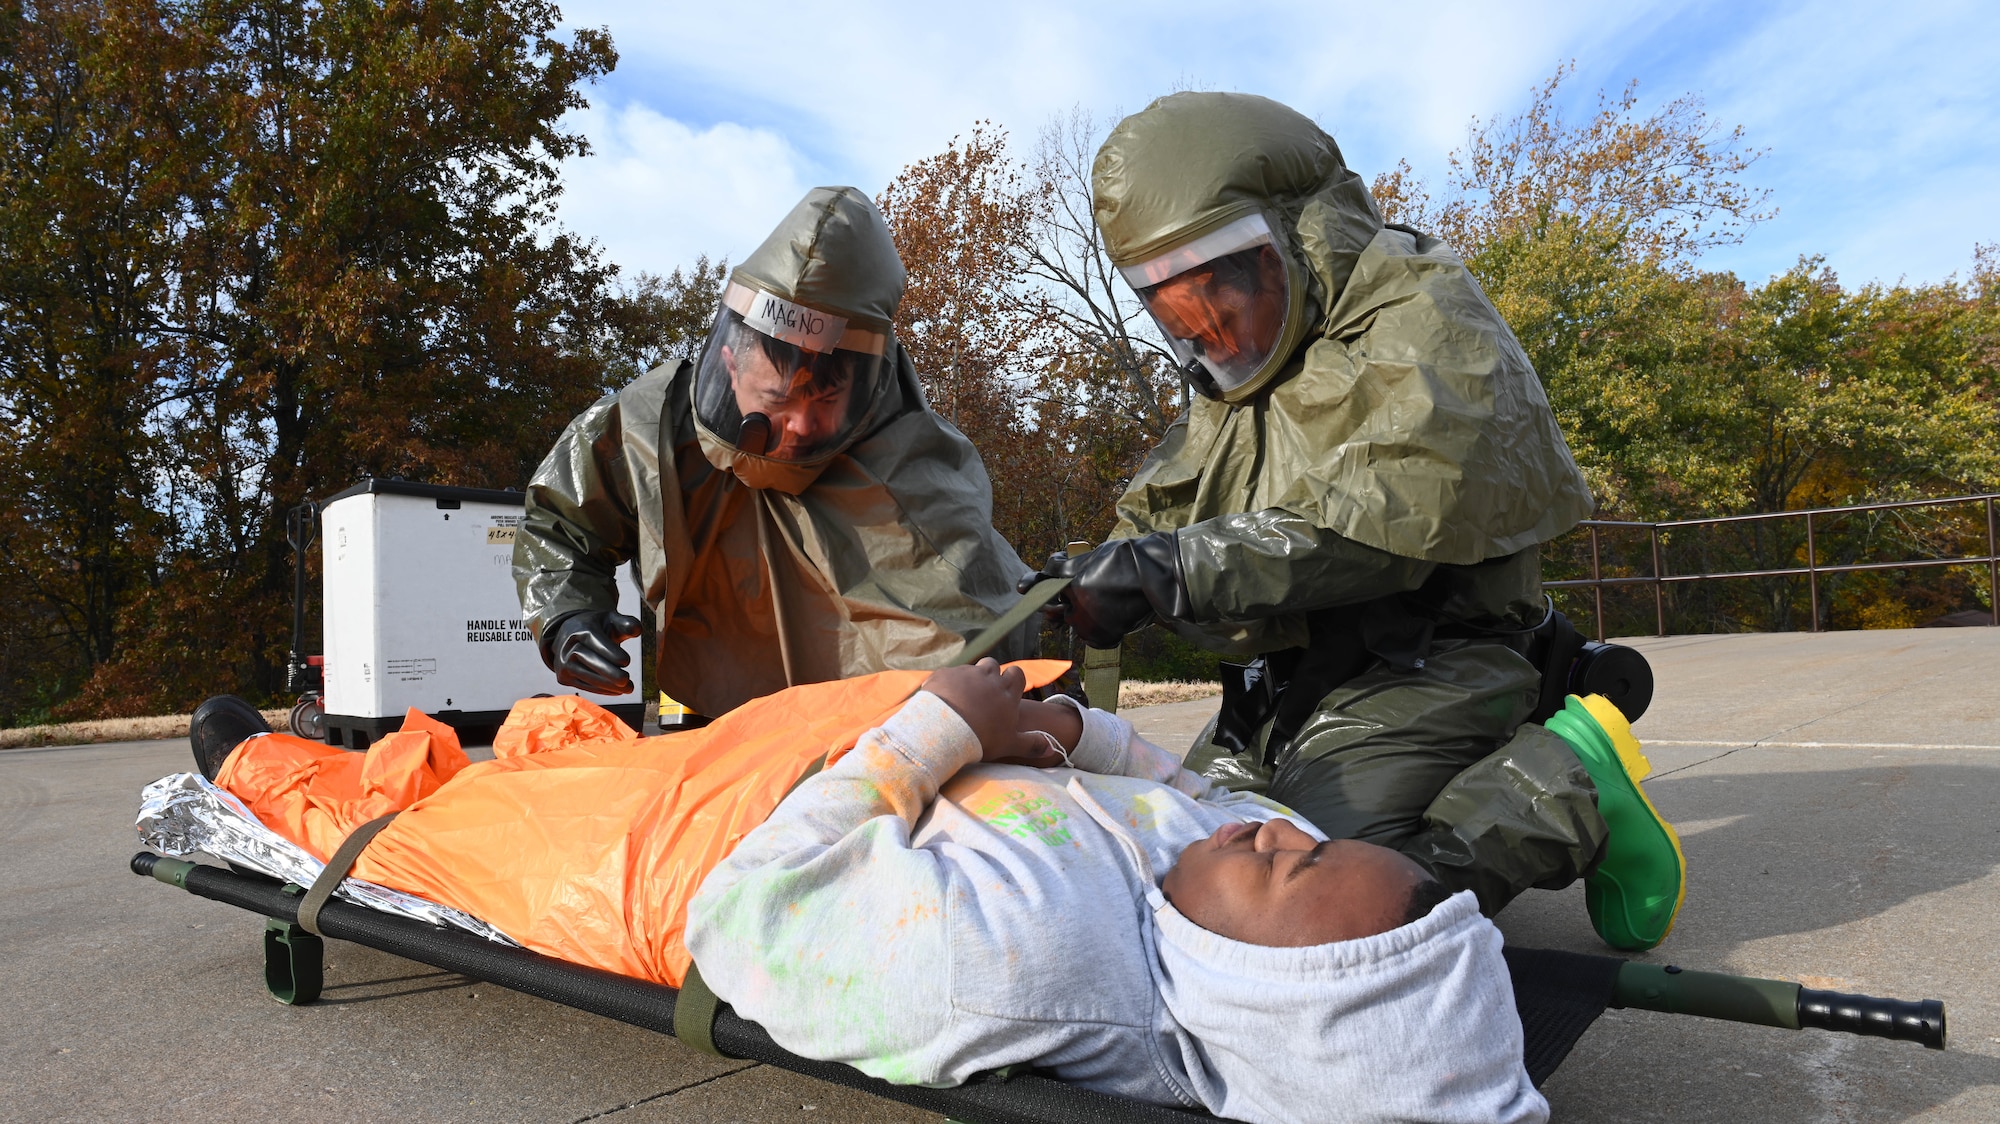 U.S. Air Force Airmen assigned to the 509th Medical Group participate in a medical preparedness exercise at Whiteman Air Force Base, Missouri, October 27, 2022. The exercise was designed to prepare medical personnel for a home station response to emergencies, and incorporated a public health emergency to evaluate the team’s response to a biological agent. (U.S. Air Force photo by Airman 1st Class Hailey Farrell)